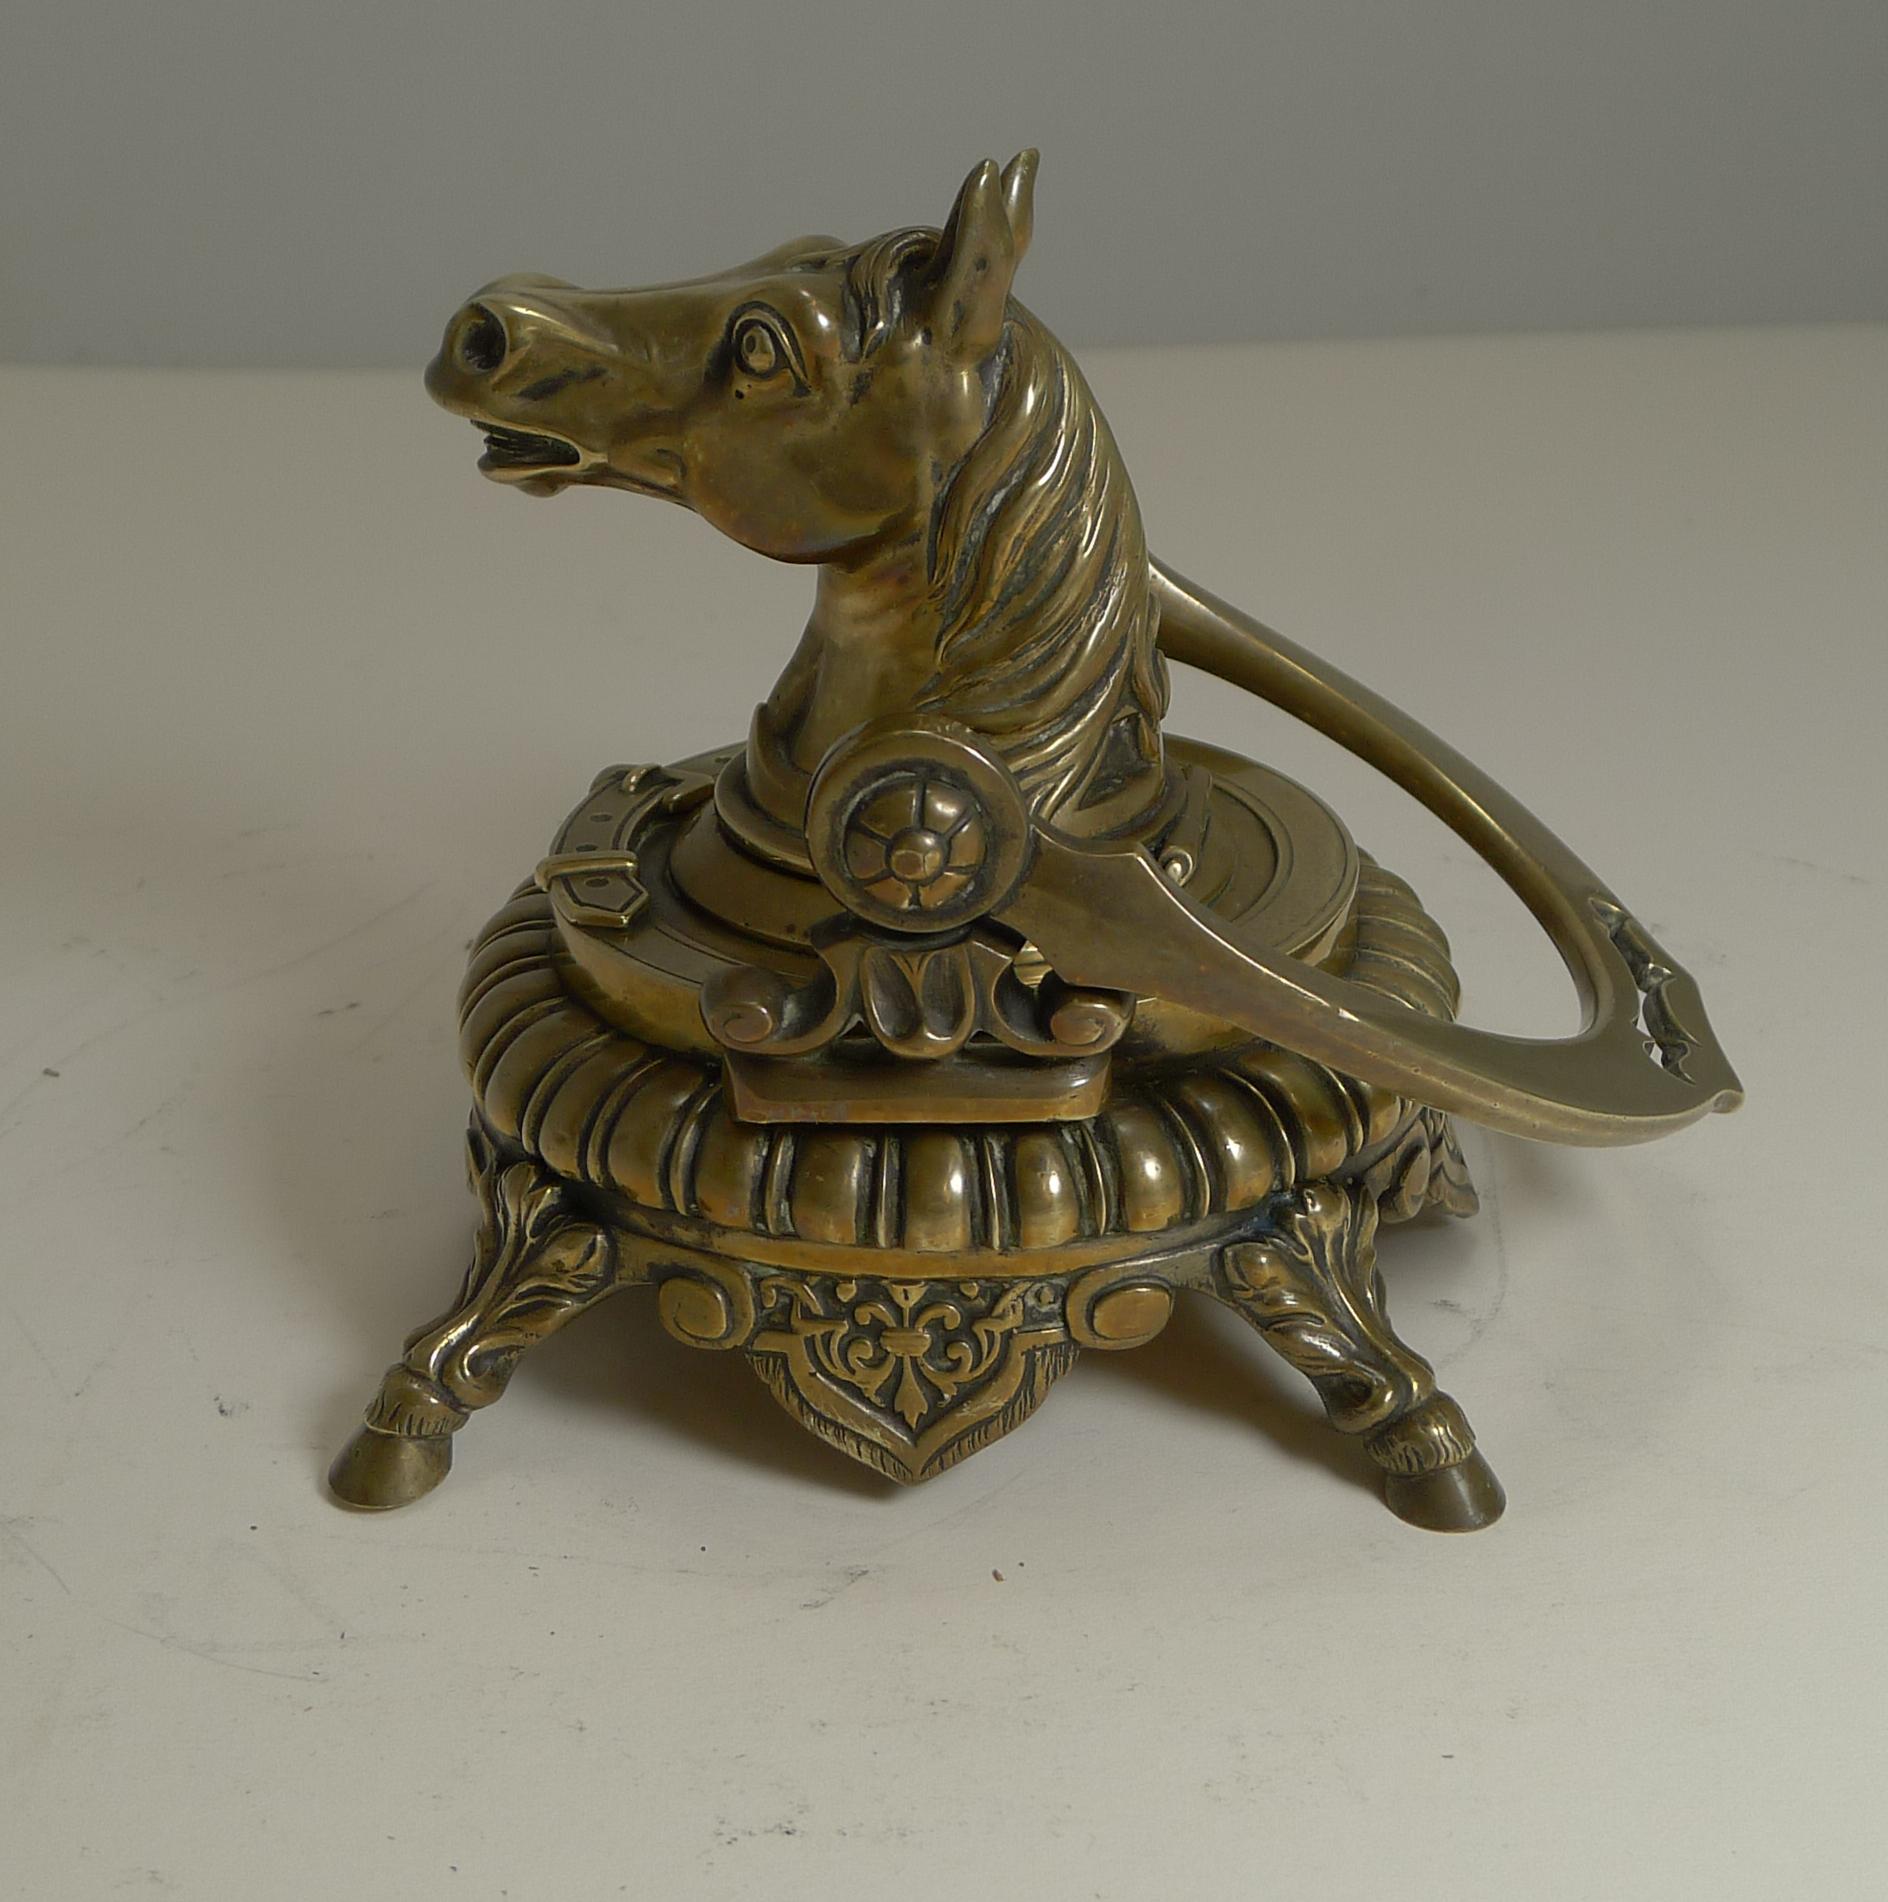 This is only the second time in many years of being in the antiques business that I have come across this wonderful figural equestrian inkwell.

Beautifully cast in solid English brass, the inkwell stands on four horse hoof legs. The folding